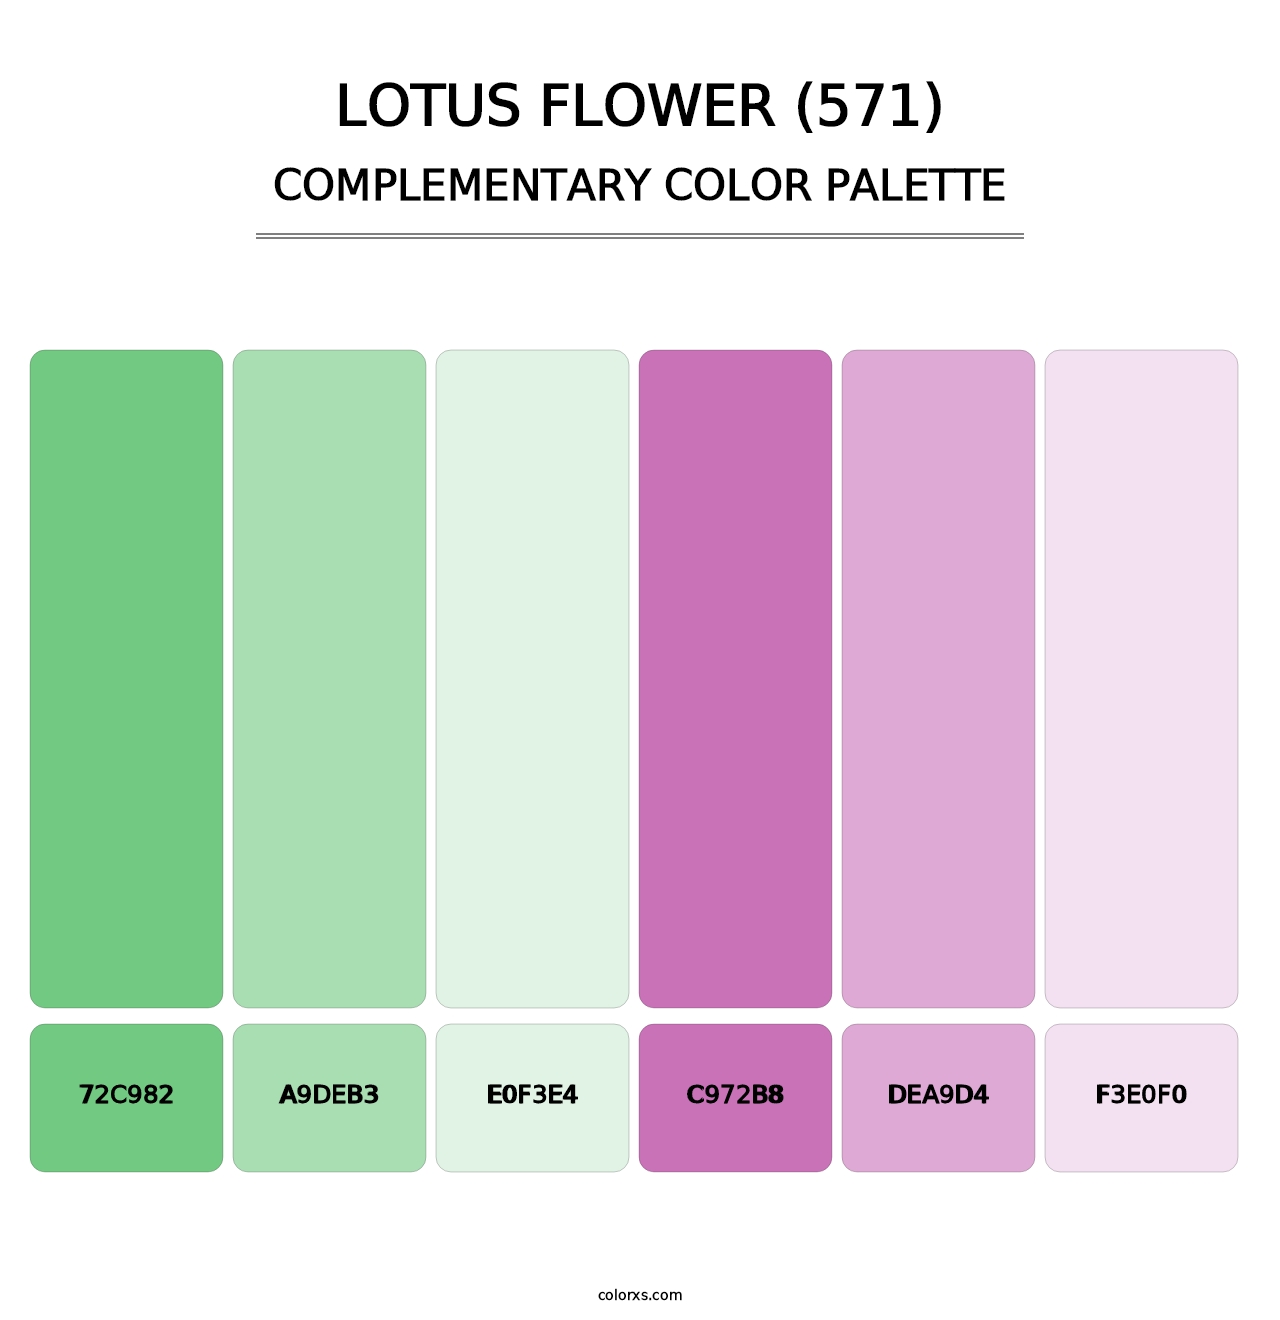 Lotus Flower (571) - Complementary Color Palette